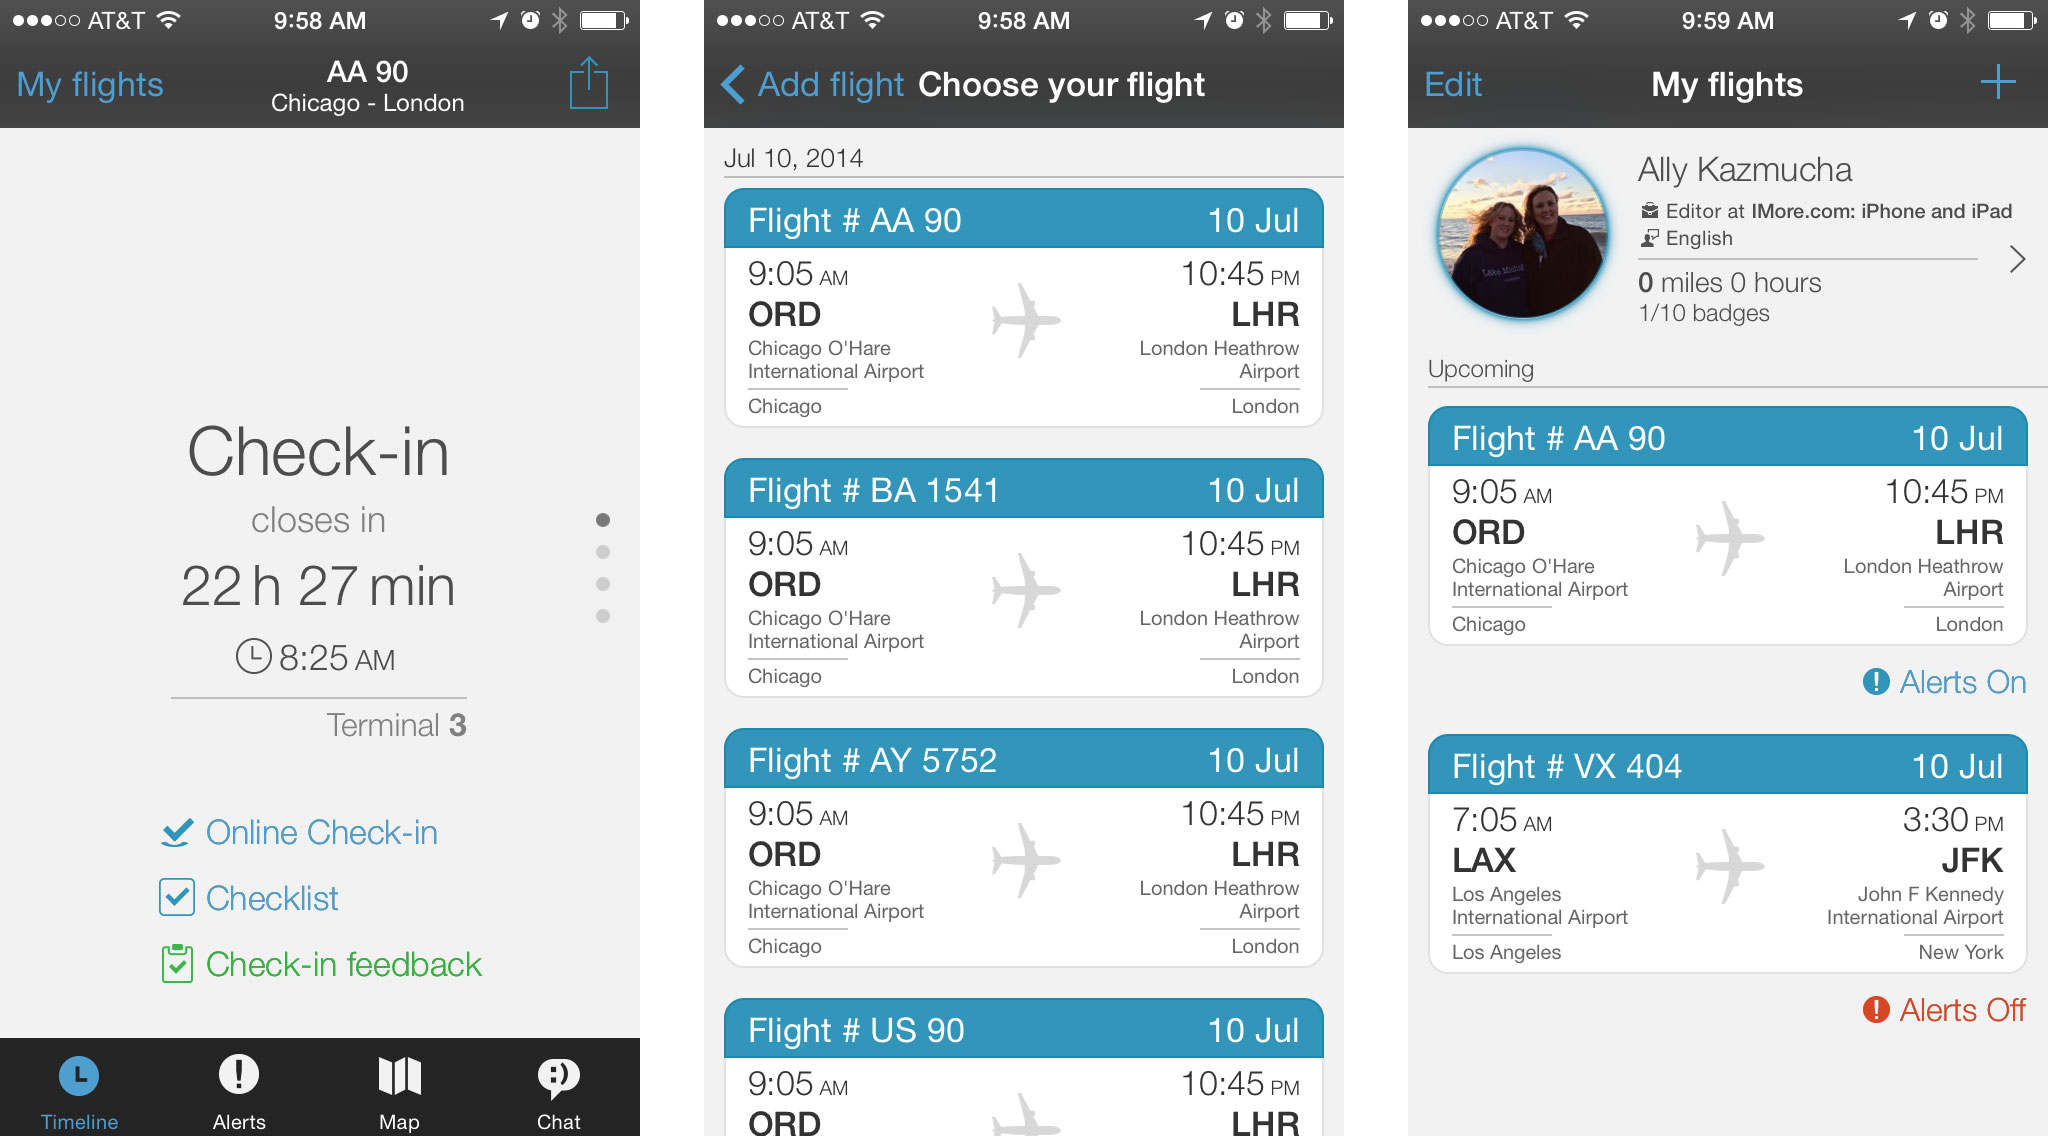 Best airport companion apps for iPhone: App in the Air